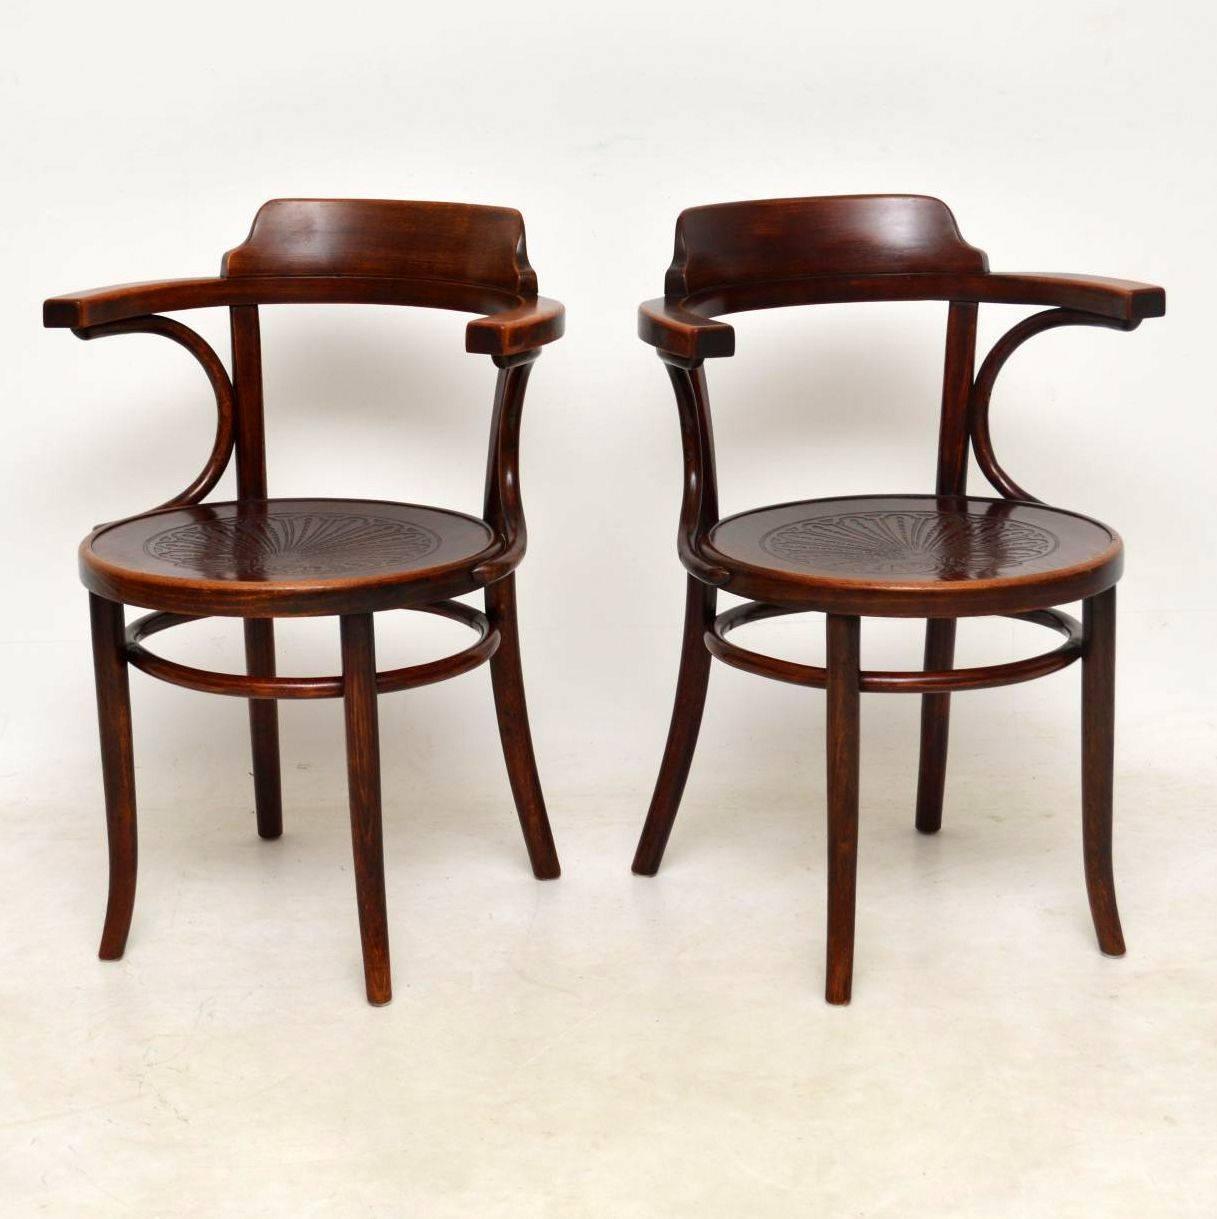 This pair of antique Thonet bentwood armchairs have an identical matching pair on another listing on the site. We got all four together. They are in good condition with a bit of natural fade in places. These chairs are very comfortable because of